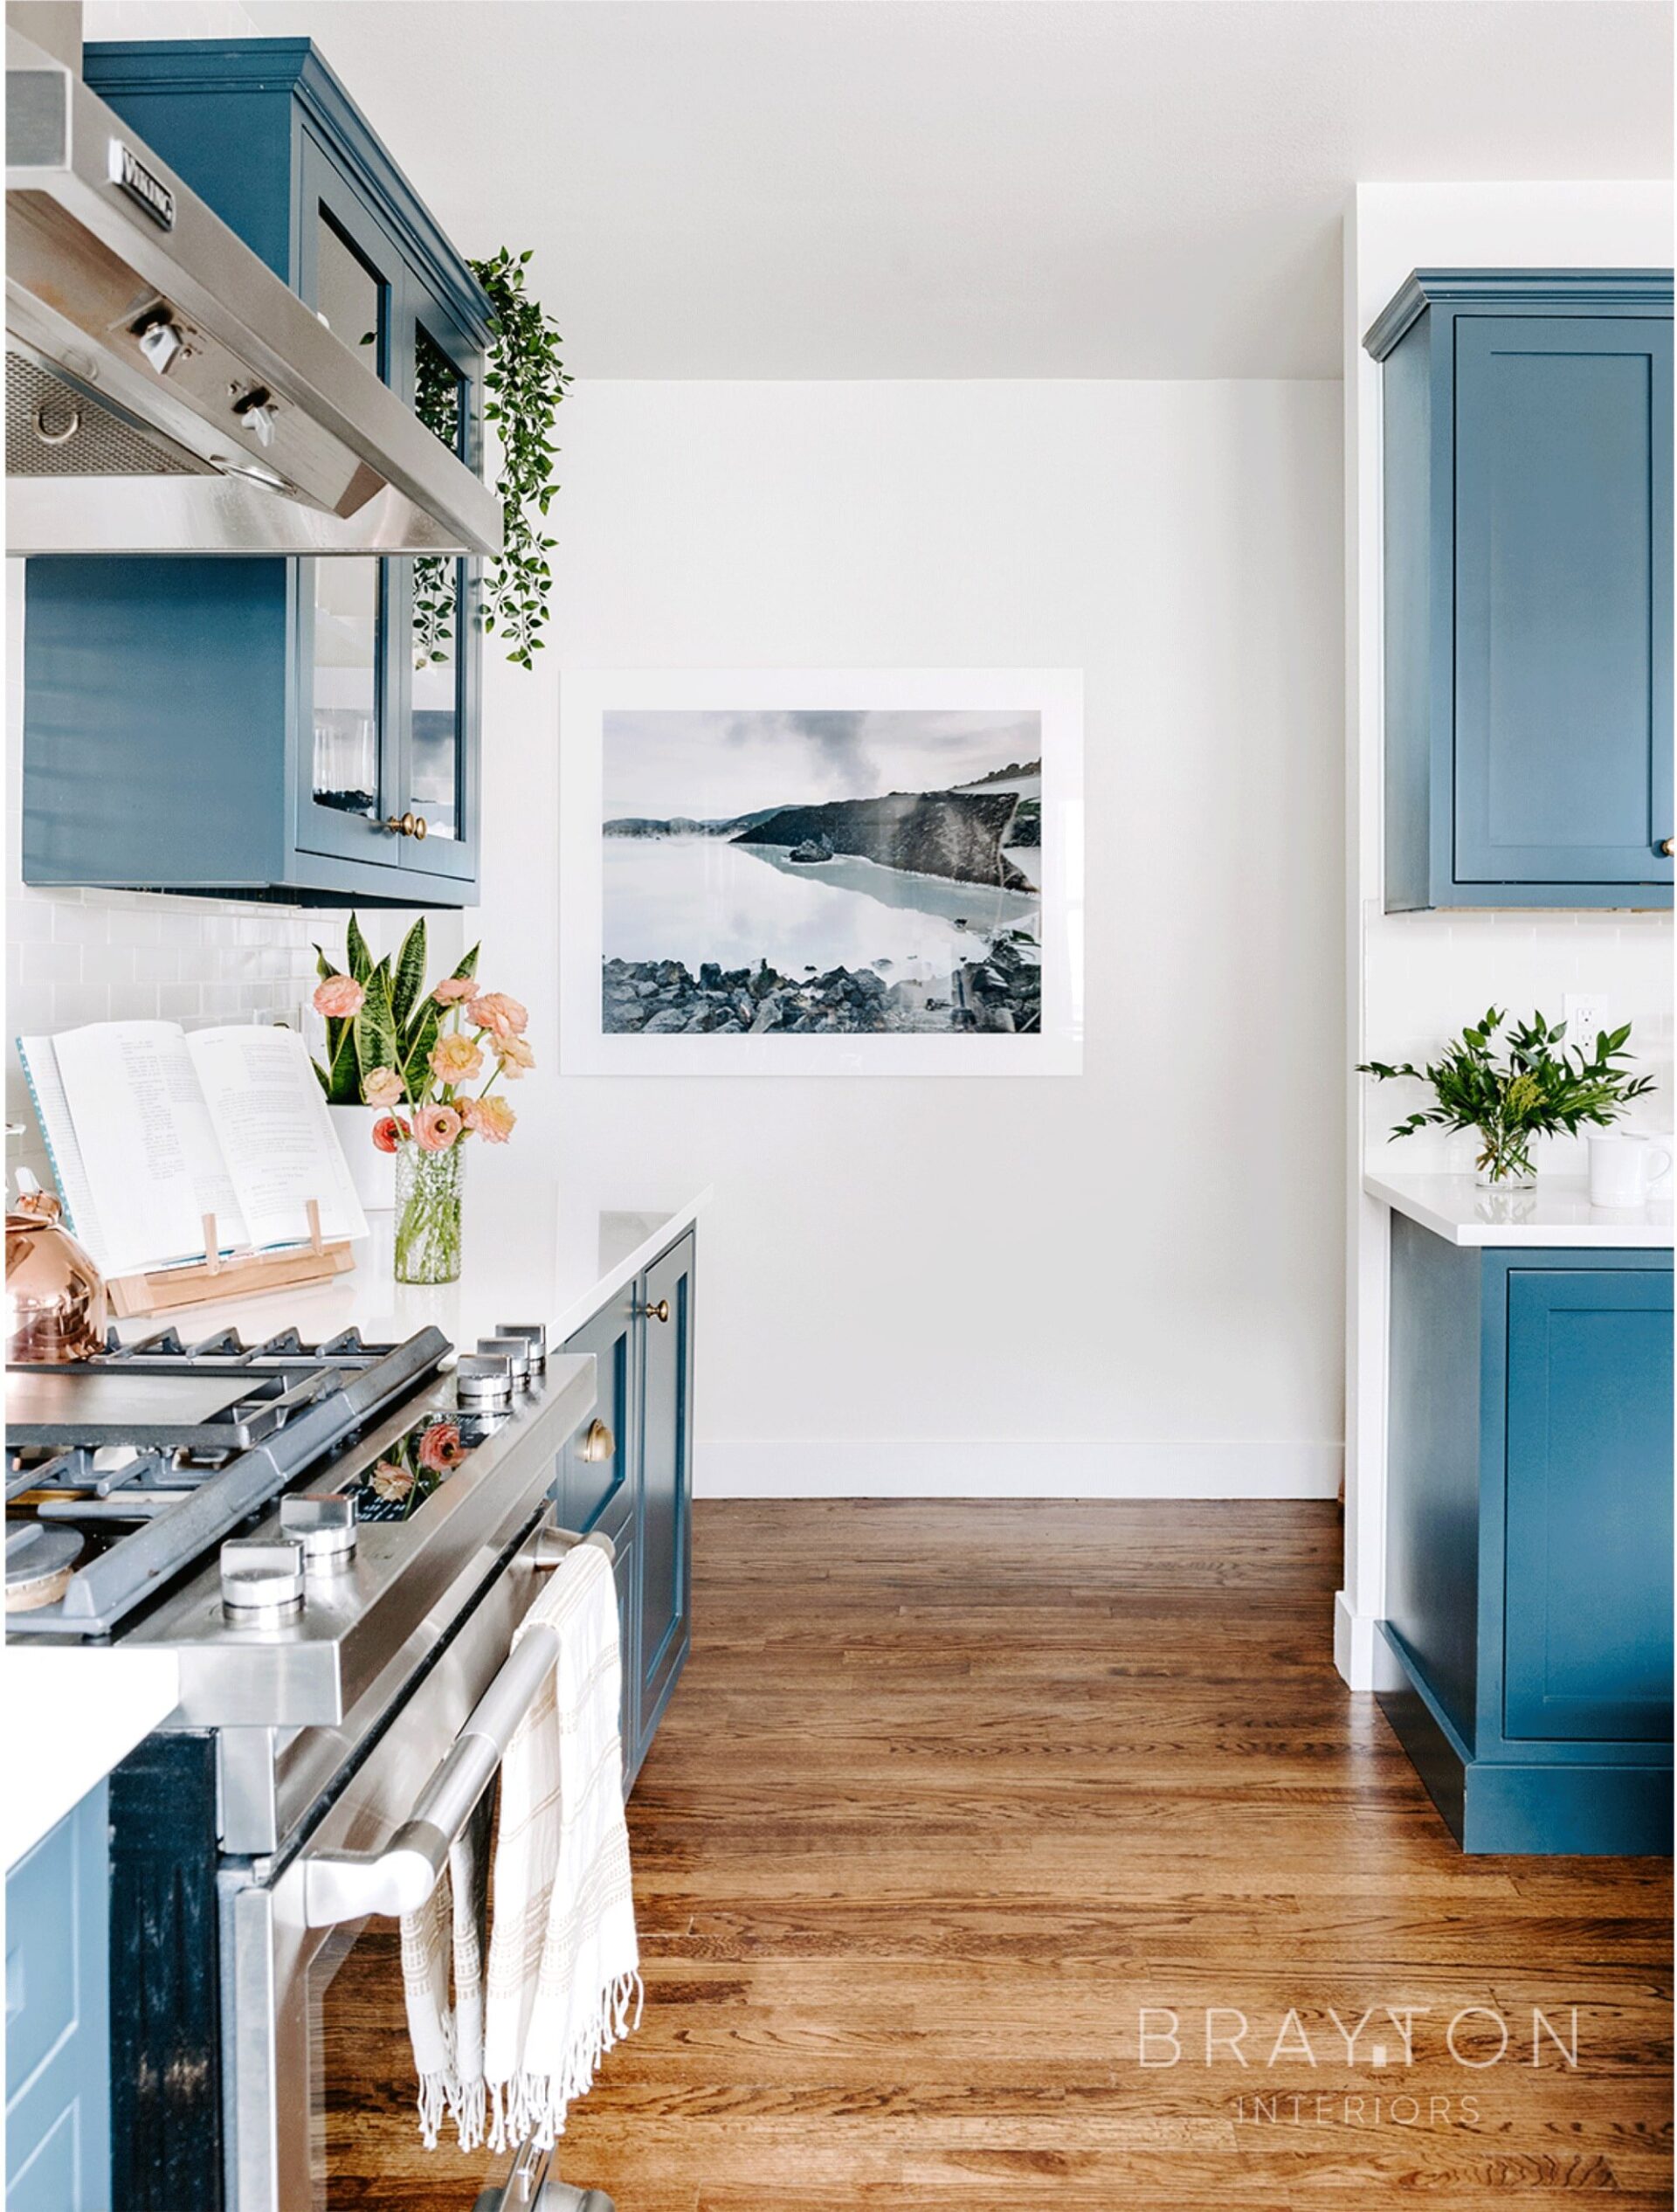 Custom color matched cabinetry (Benjamin Moore “Narragansett Green”) with original historic solid hardwood floors, with a custom framed art print in the background.